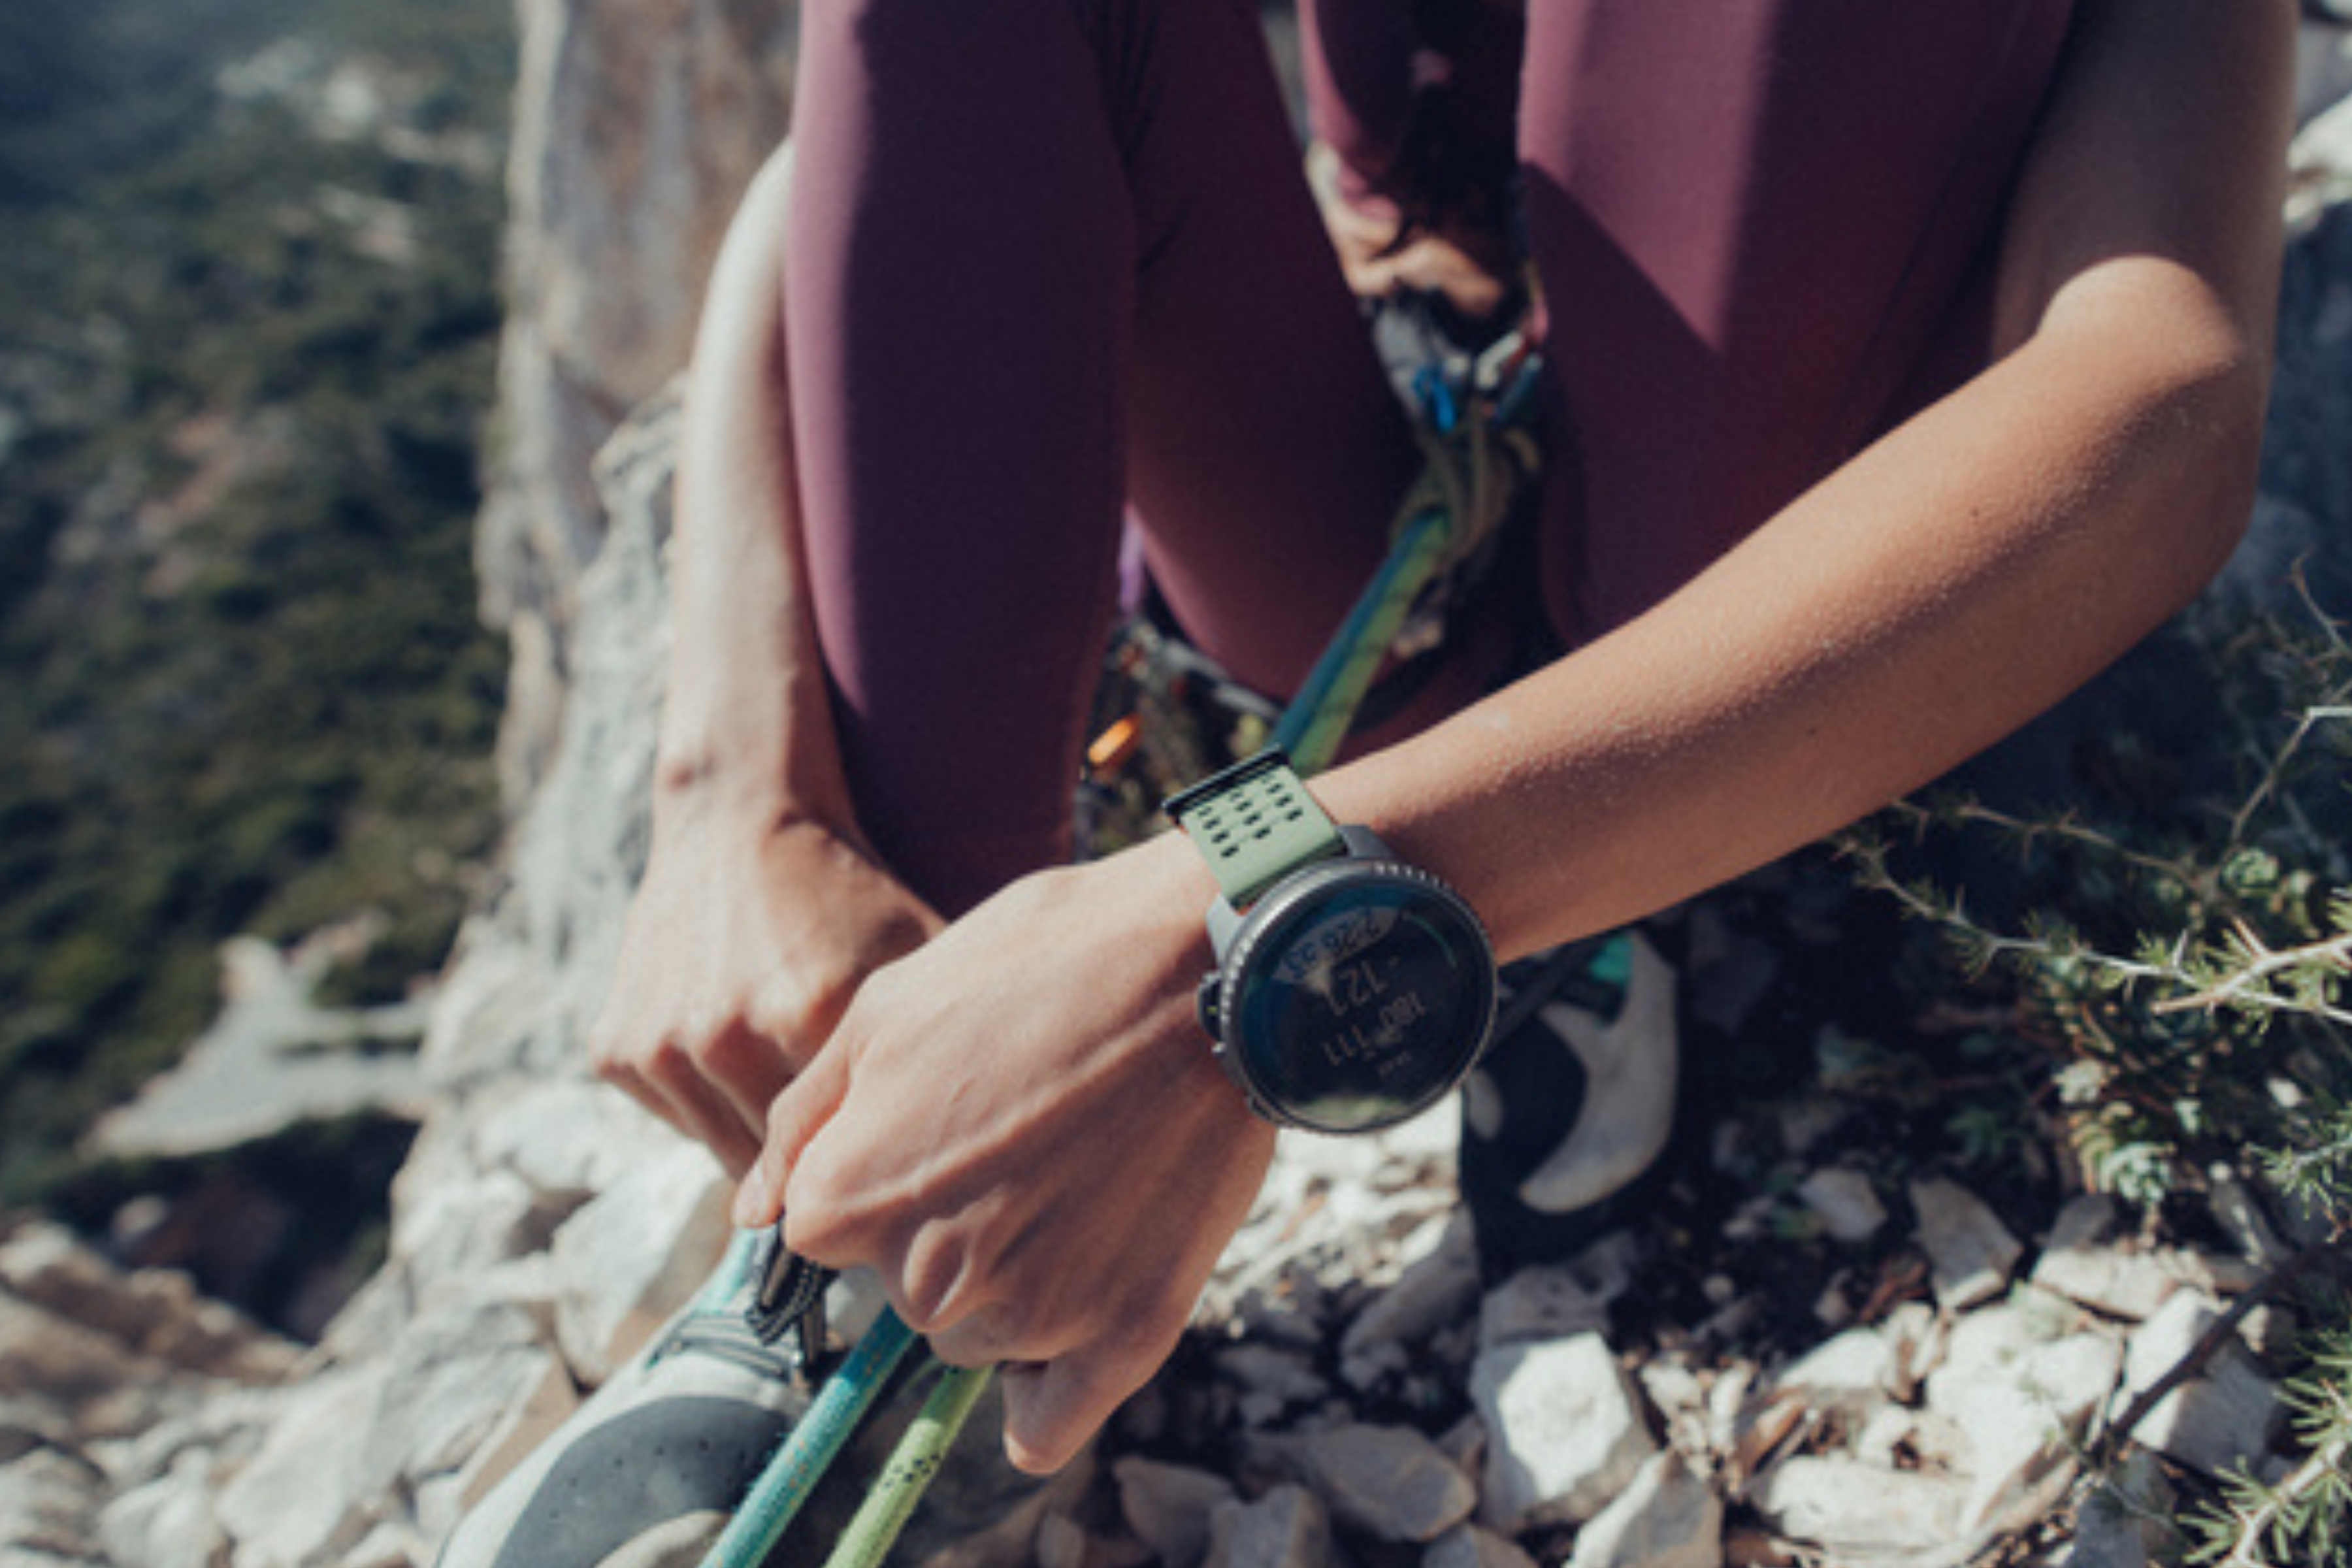 New Suunto Vertical watch has free offline maps and solar charging